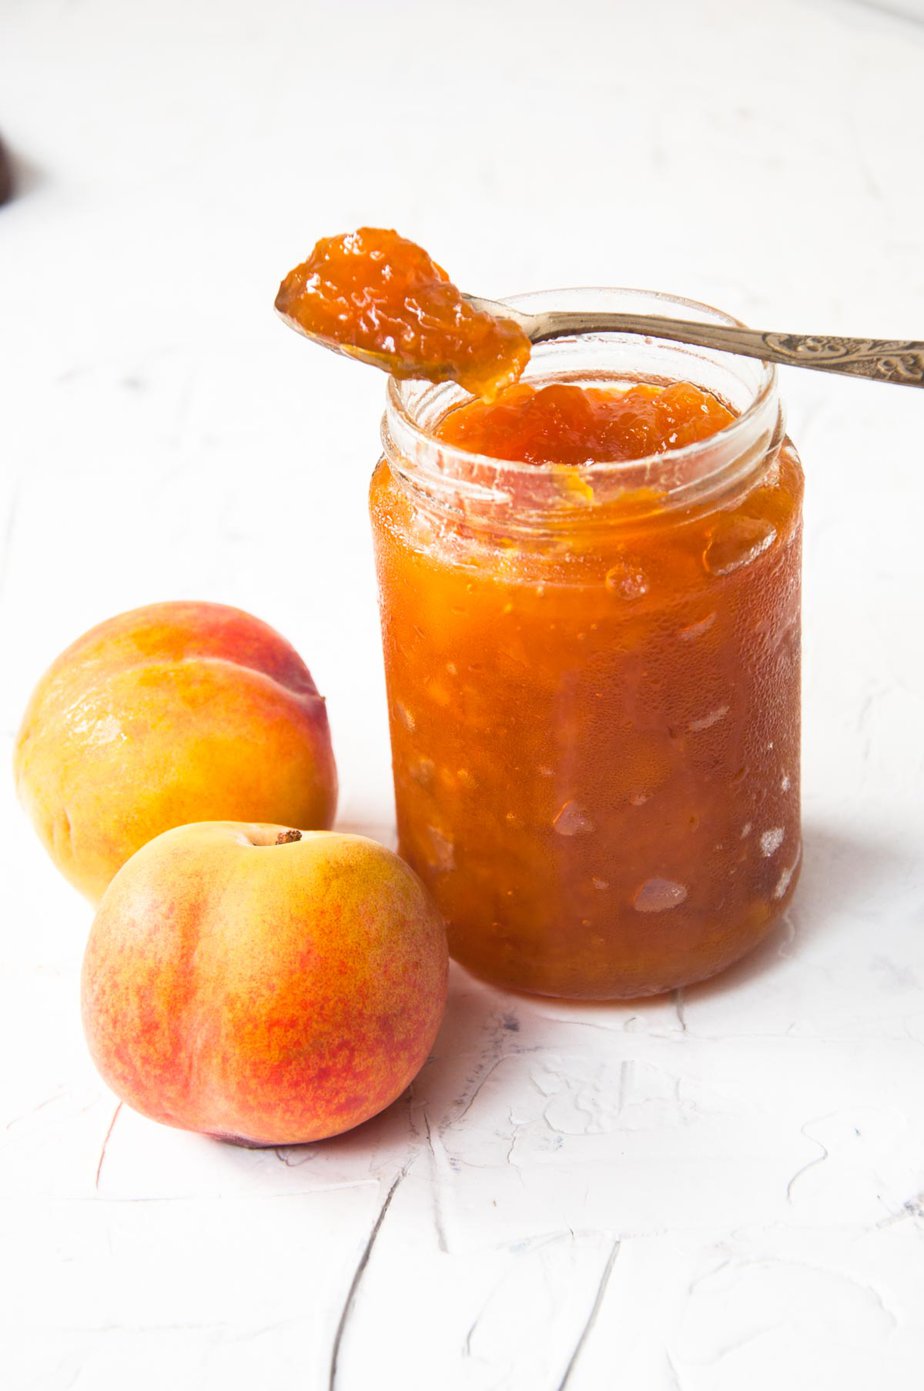 Peach jam jar with two fresh peaches on the left. 